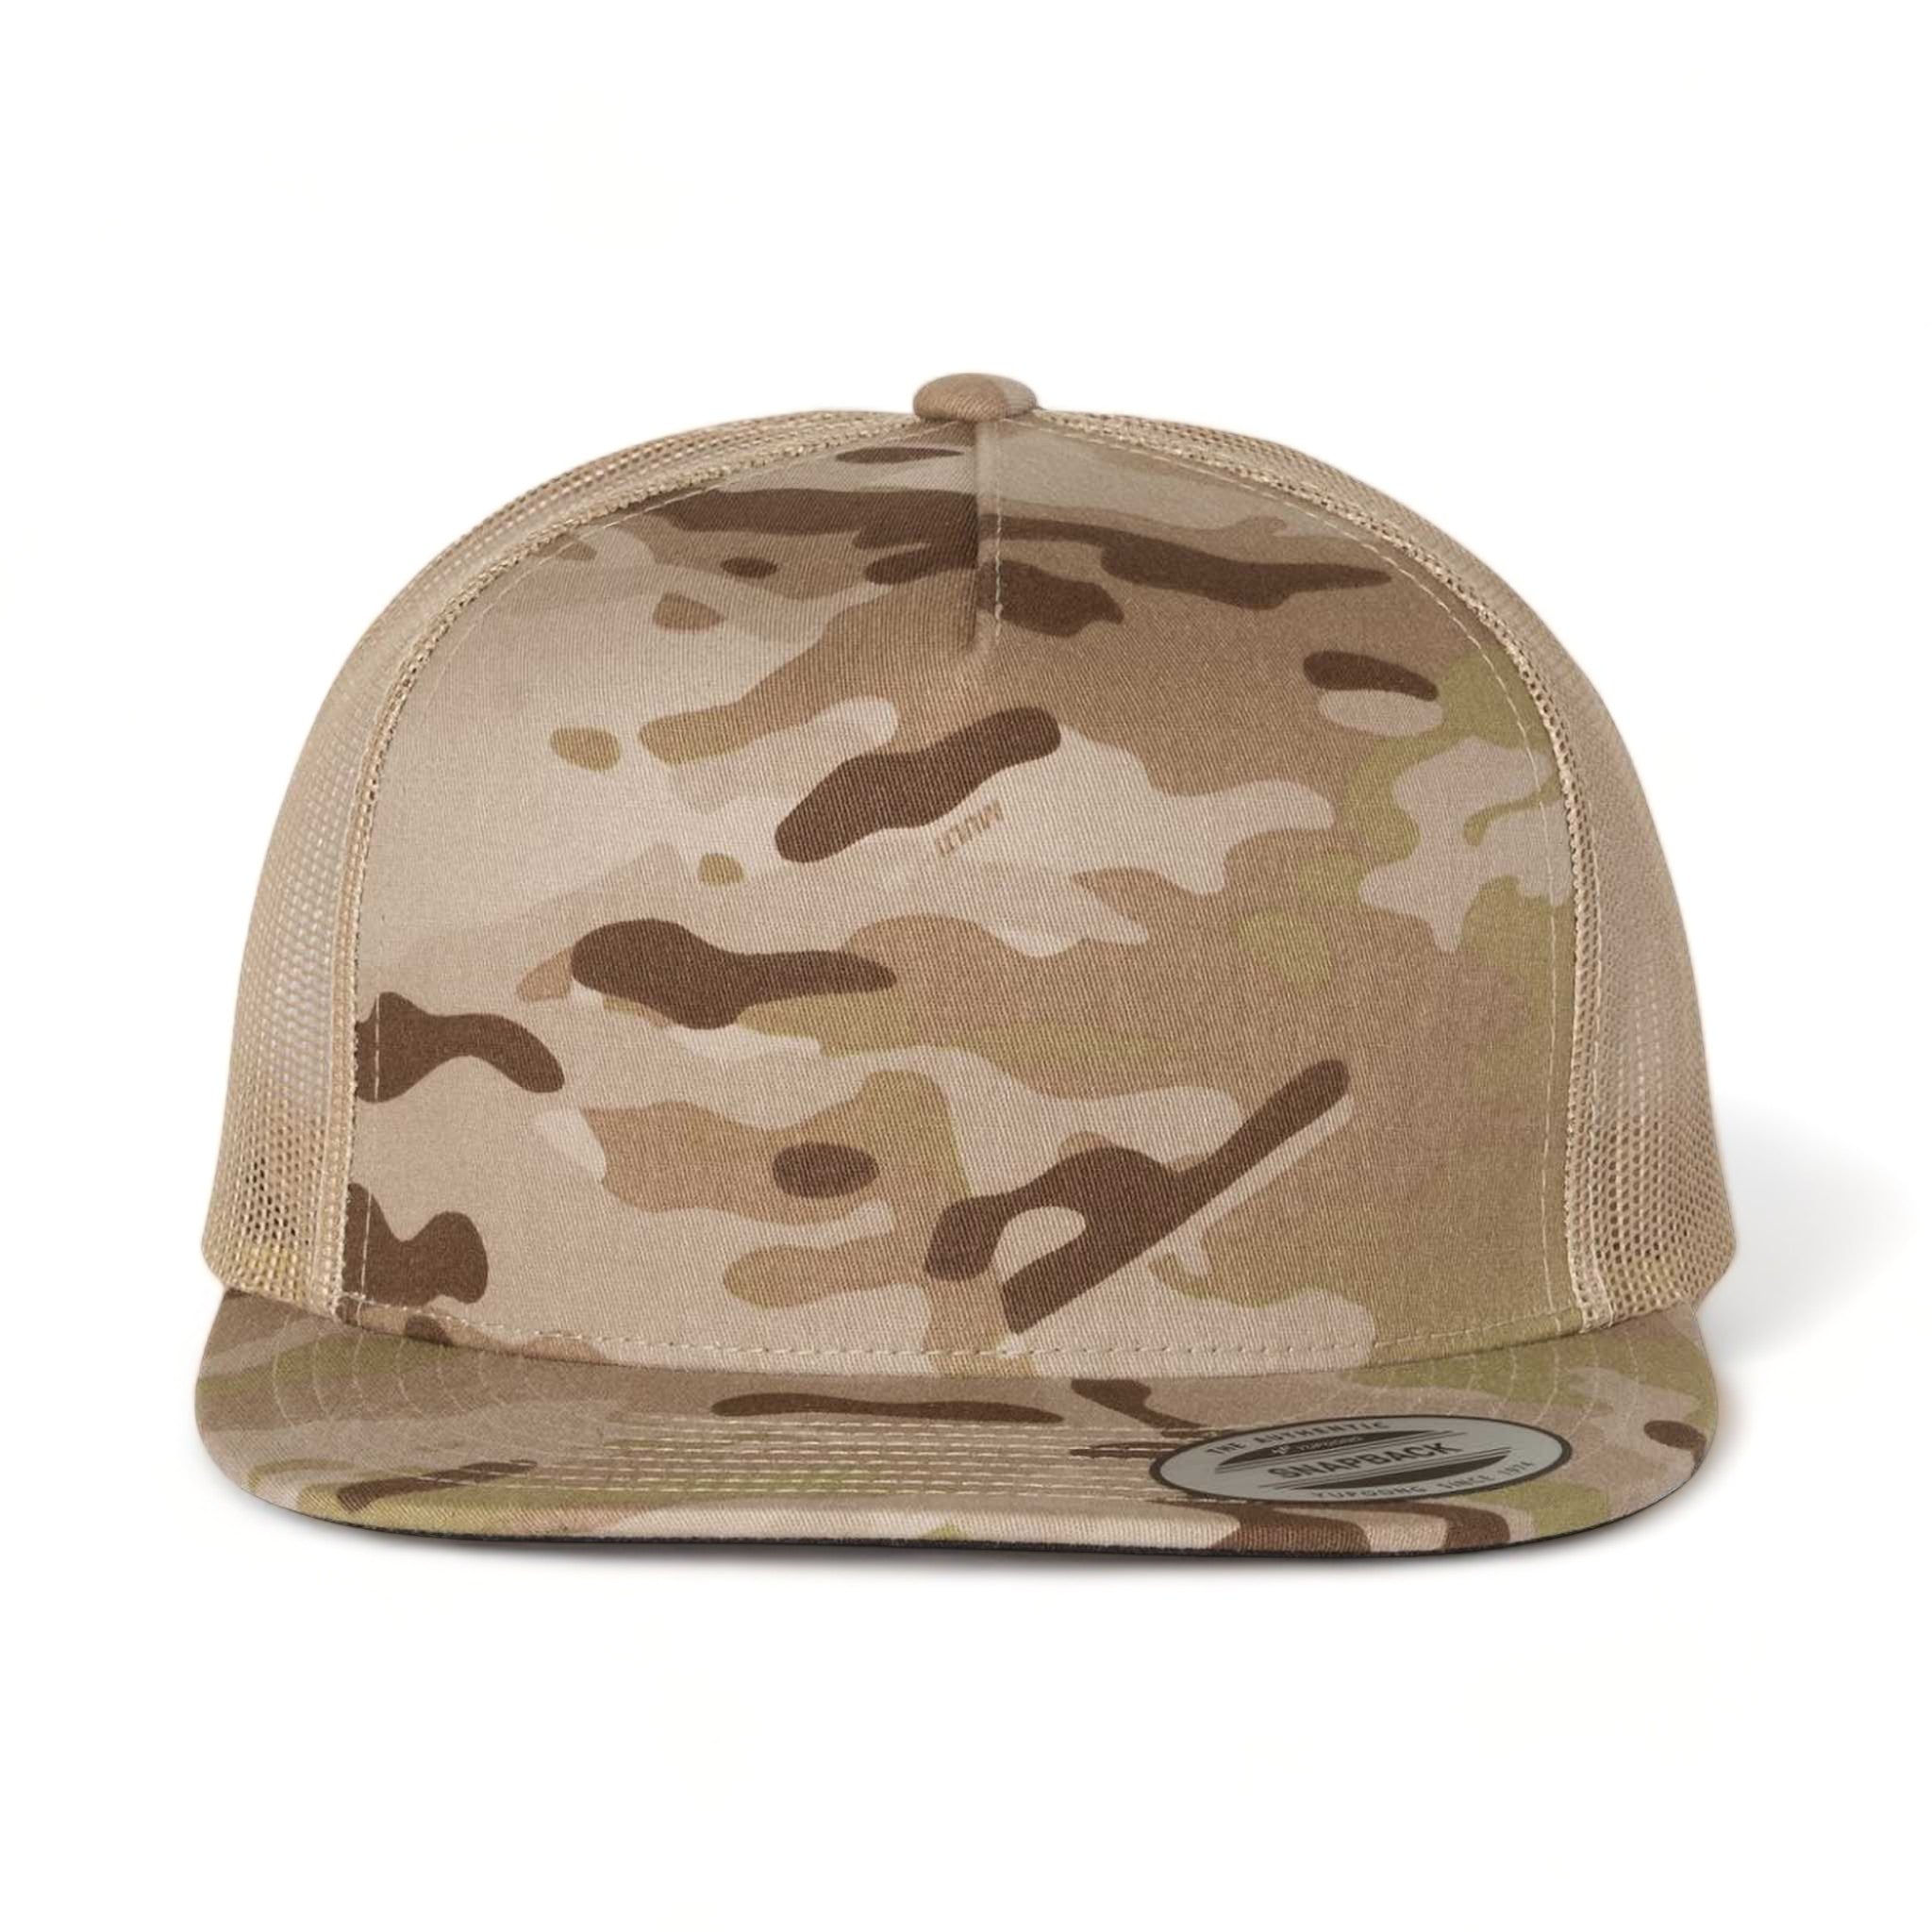 Front view of YP Classics 6006 custom hat in multicam arid and tan